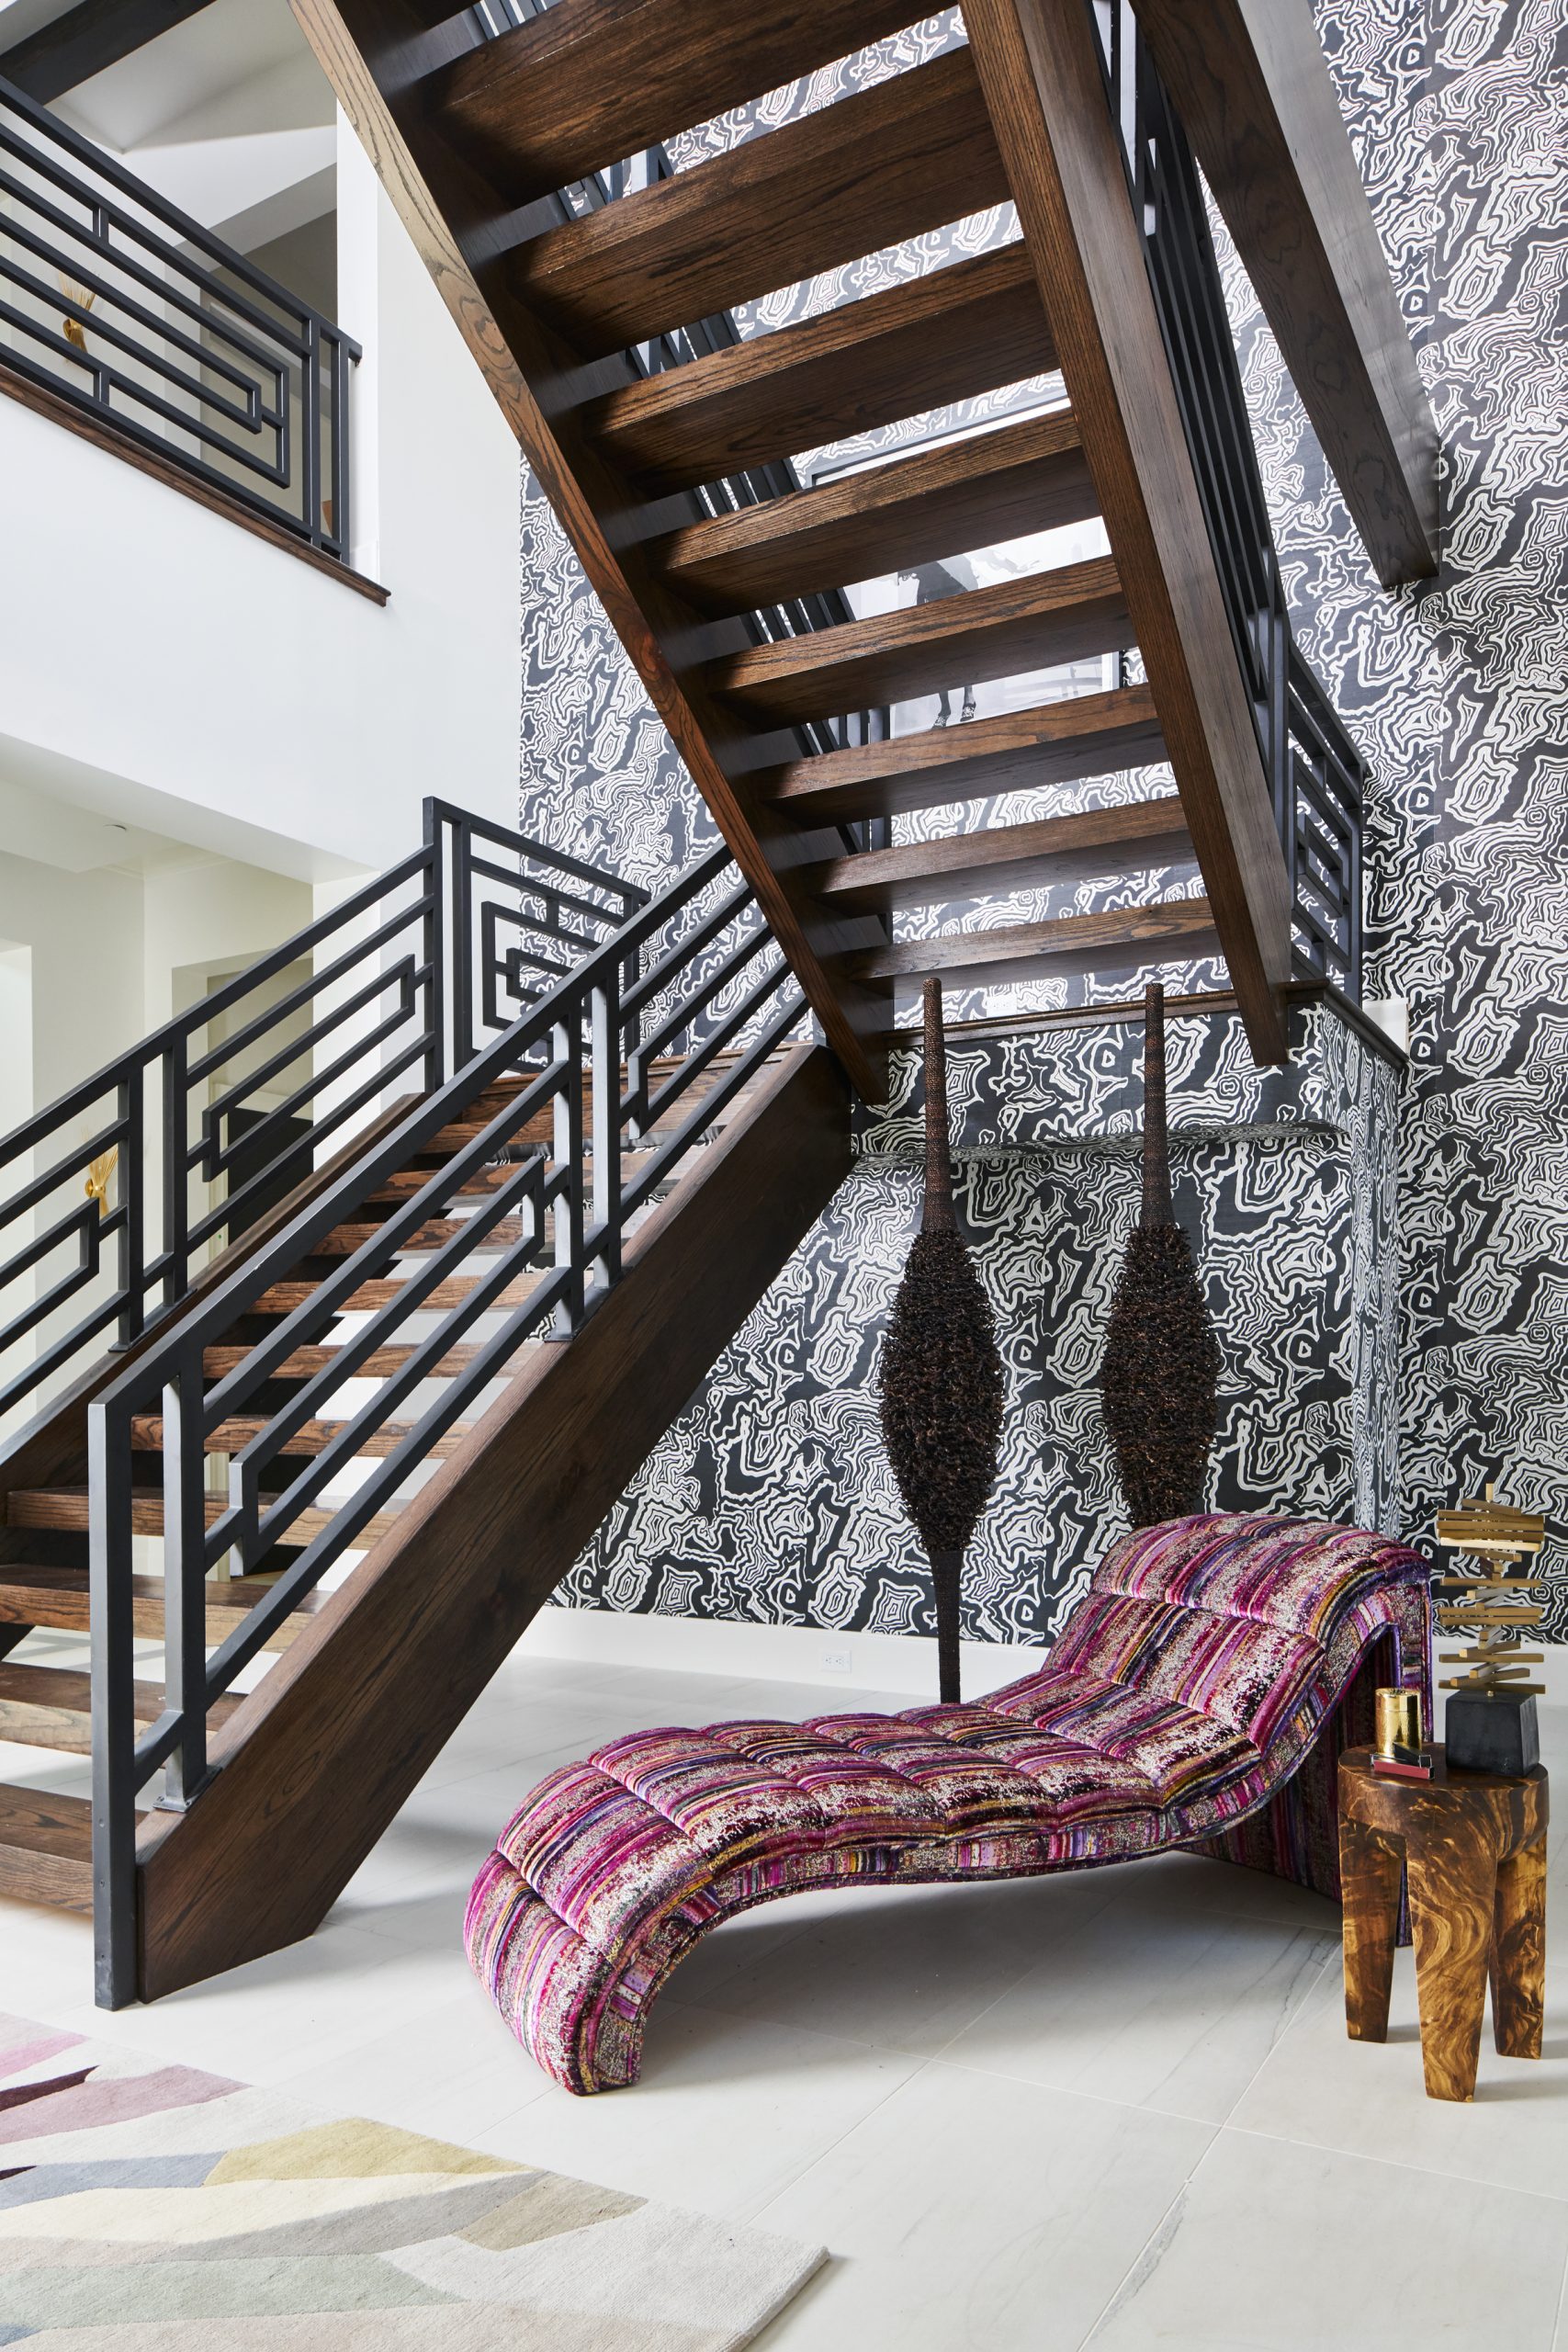 Traditional Home Dallas Showhouse, Bridget Beari Wallcovering, Buscemi wall covering, tina turner art, geometric railing, chaise lounger, s. harris brushstroke, double volume entry, modern staircase, entryway, circa lighting, gold chandelier, urchin sculpture, wood side table, the rug company, colorful rug